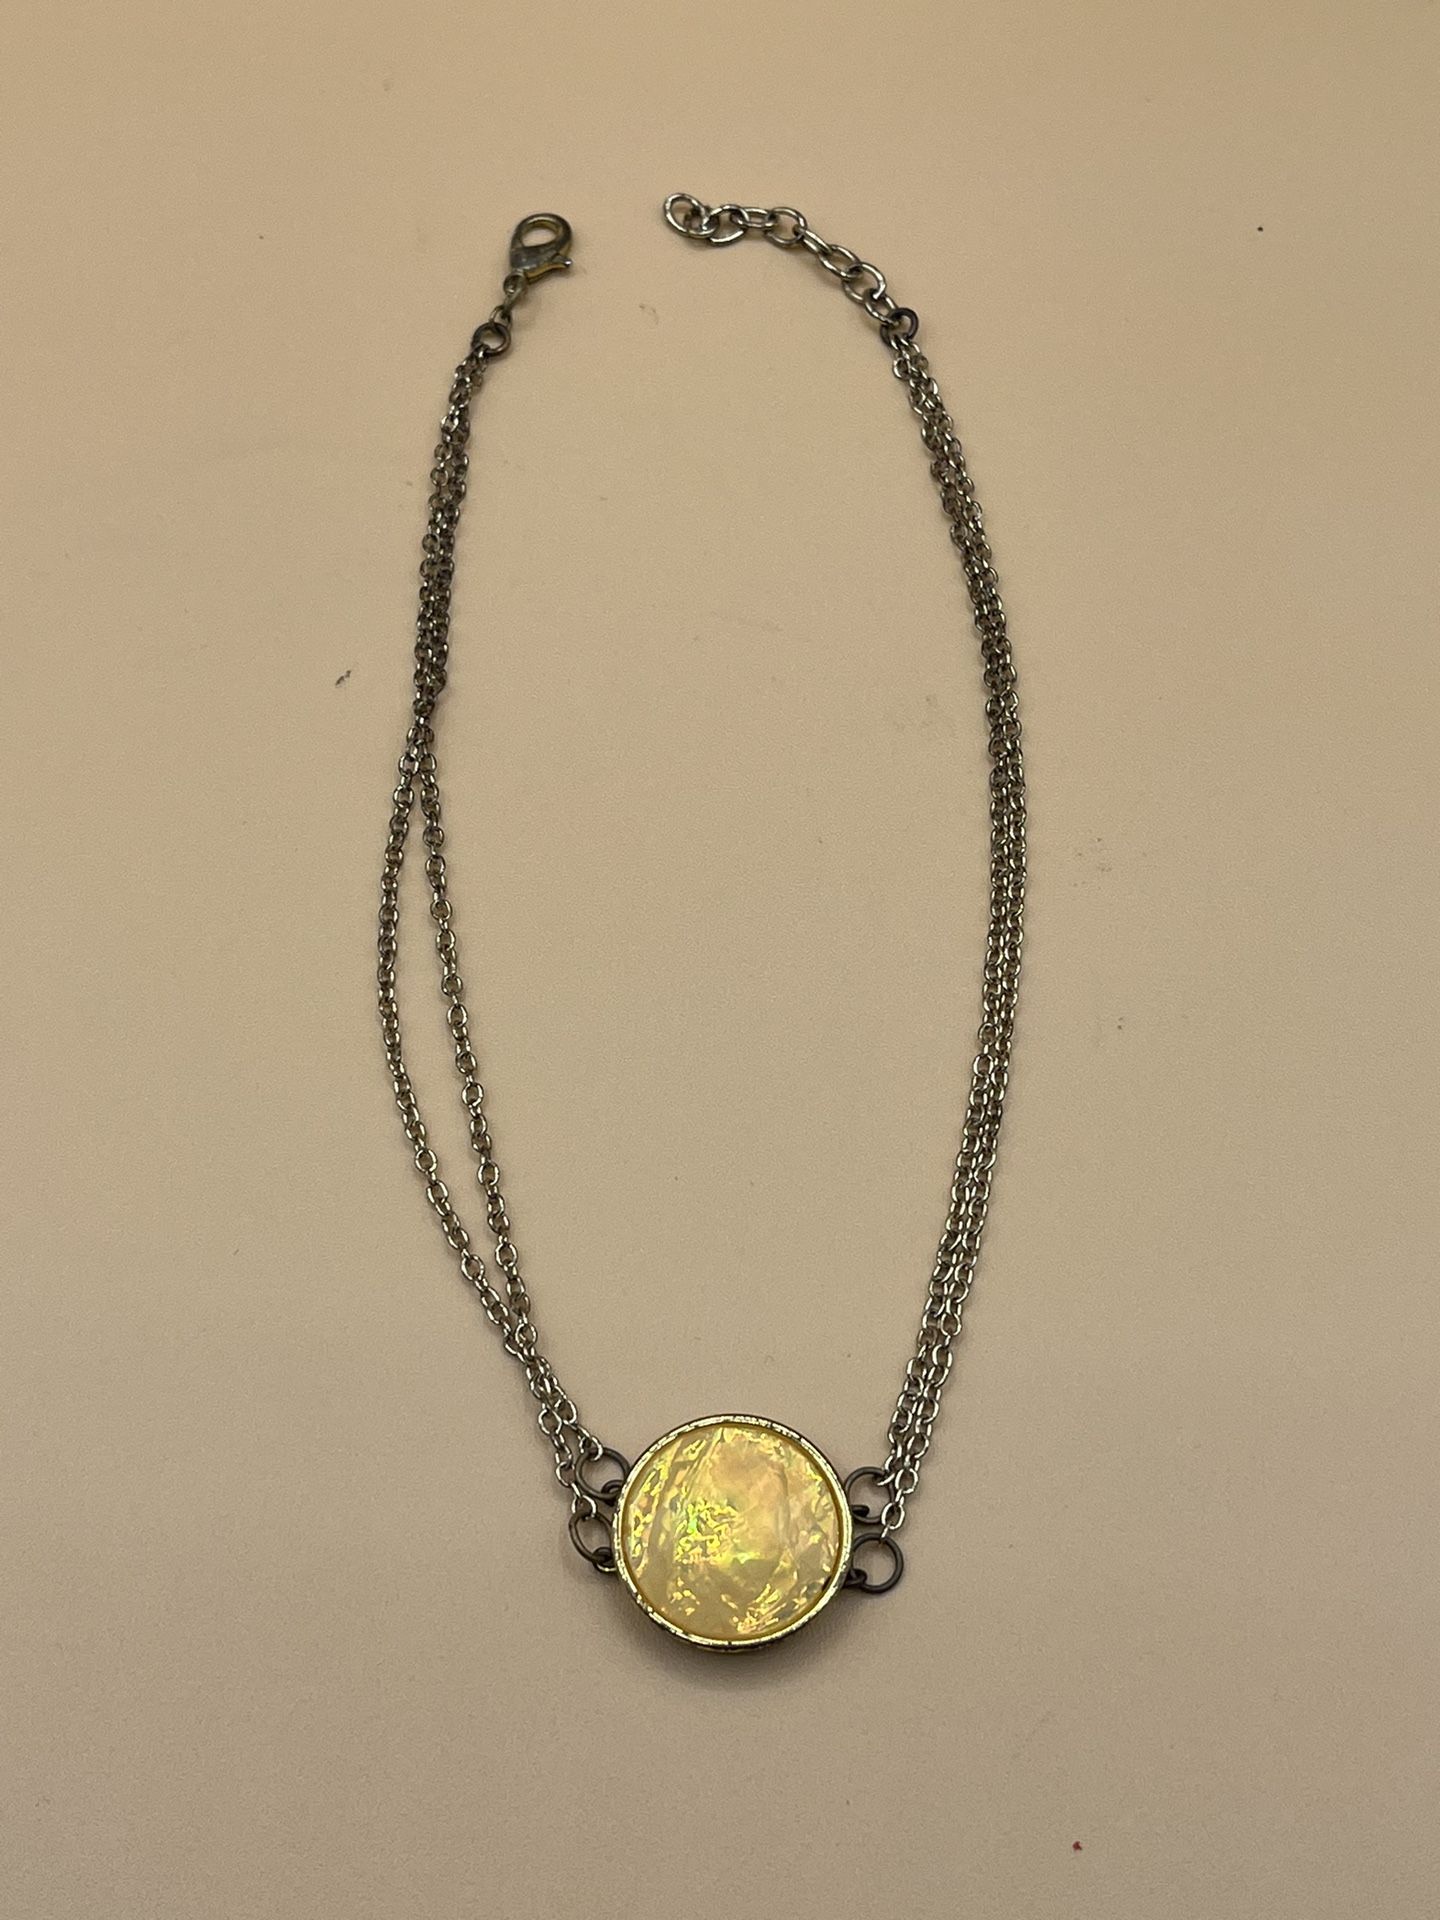 Vintage Double Chain Choker With Yellow Pendant